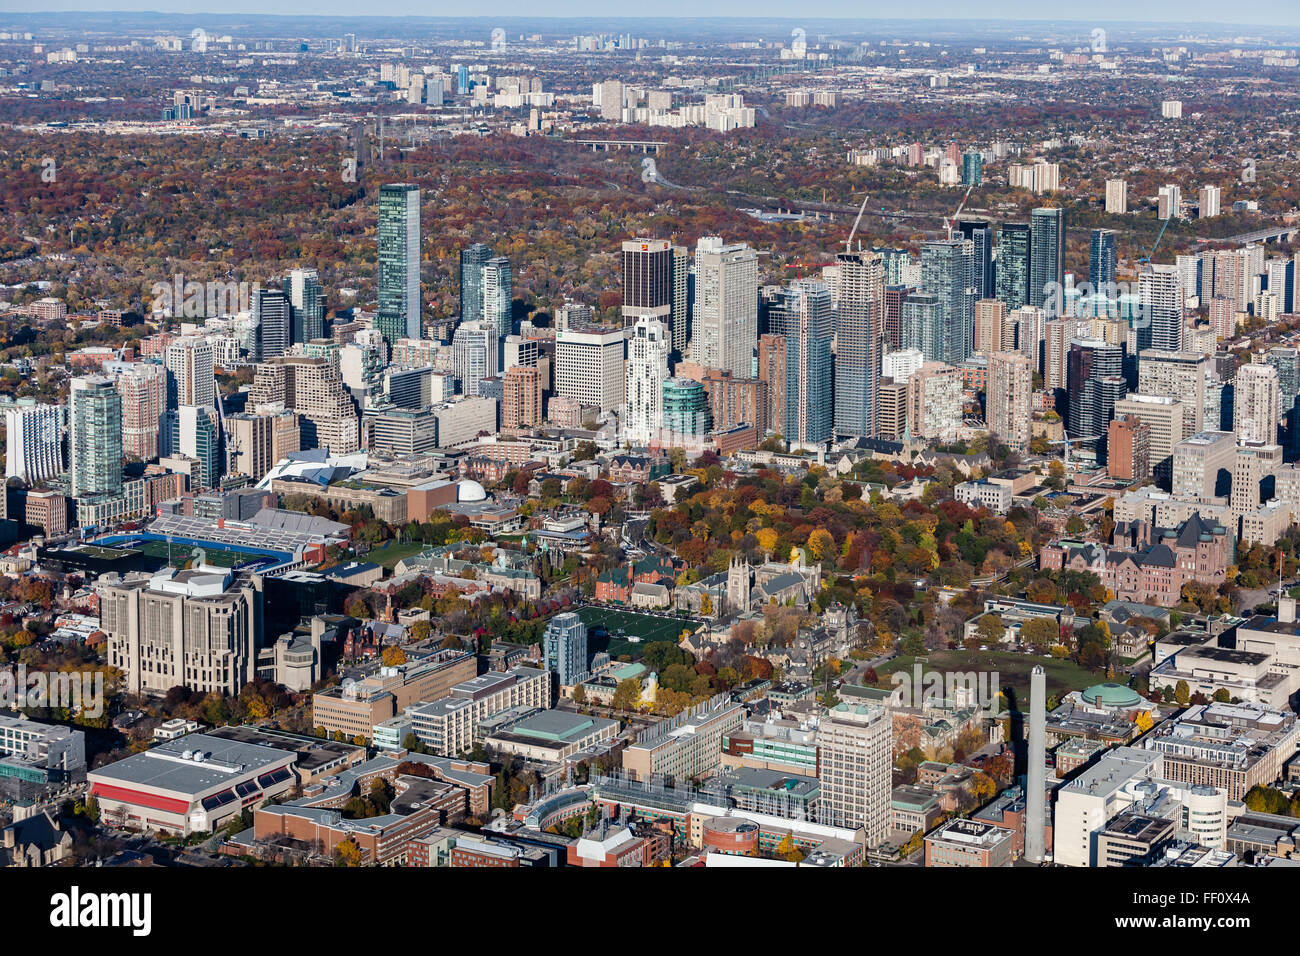 Aerial of Toronto Bloor and Yonge Street showing part of the University of Toronto, UofT campus. Stock Photo